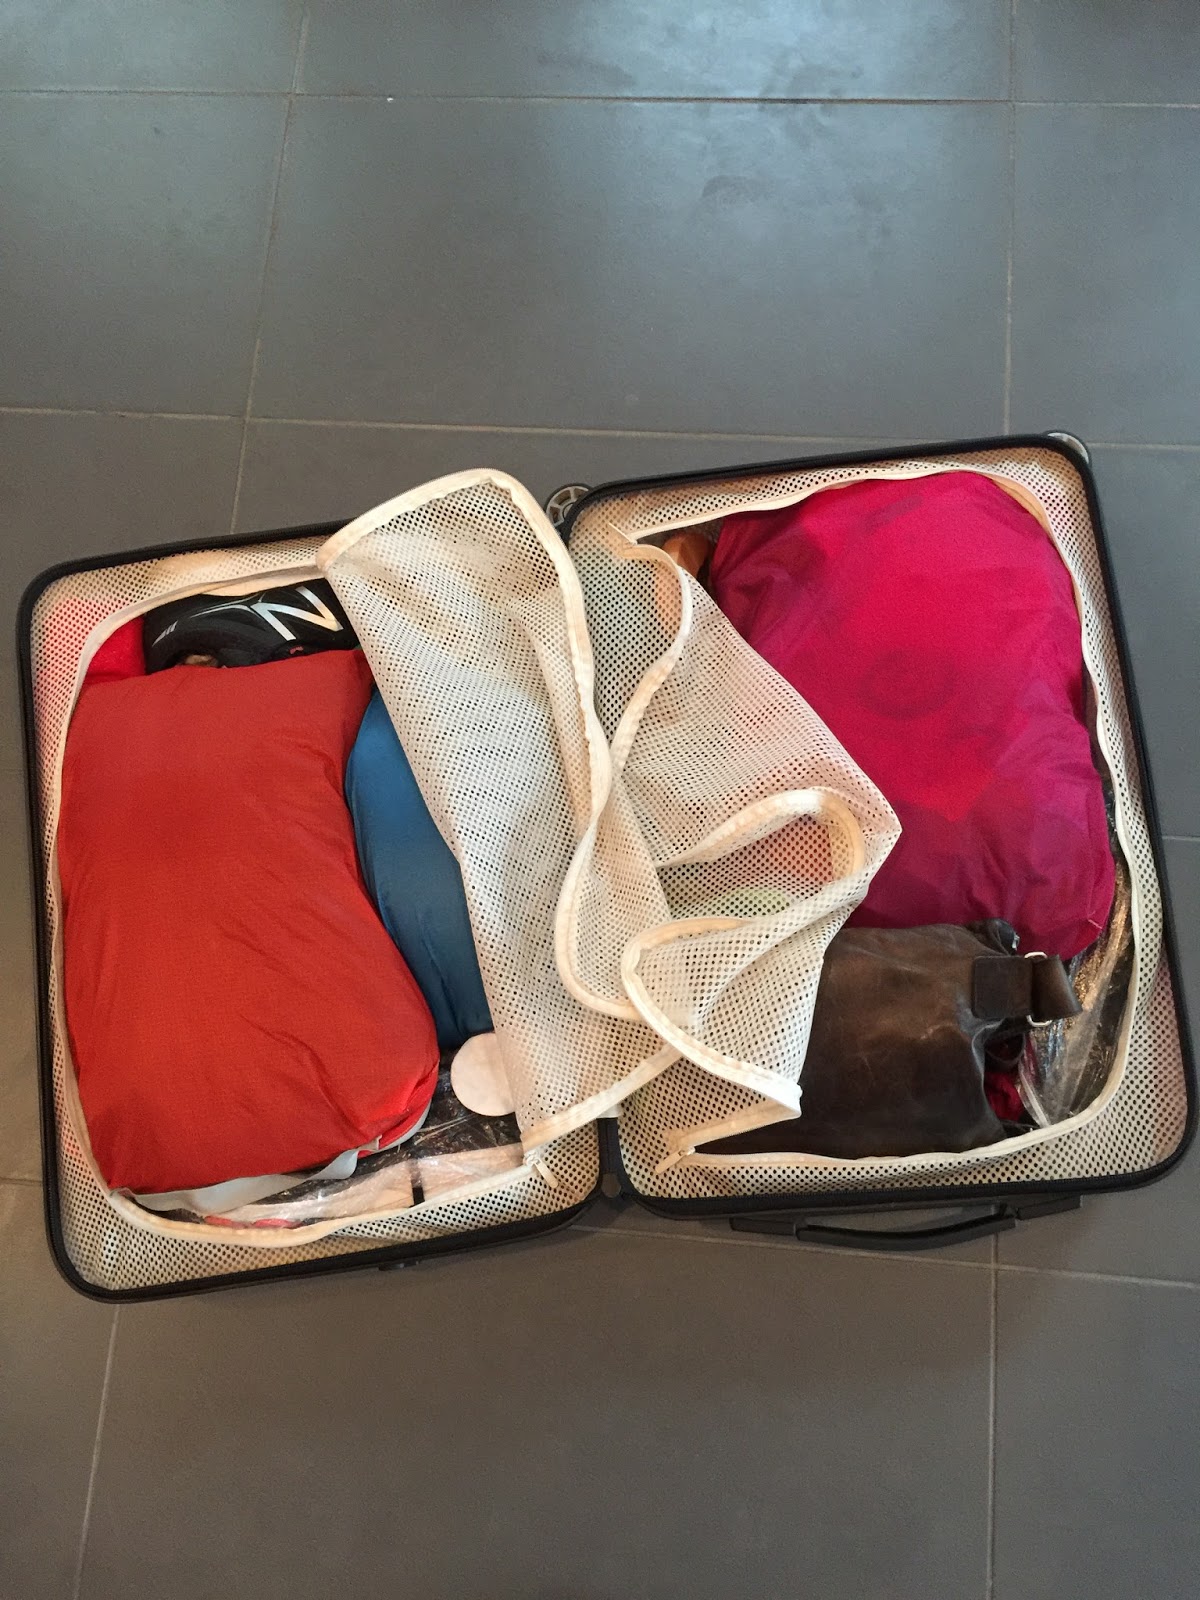 Time to Zip It! My Travel Case, That Is: One Carry-On, Five Weeks in Europe